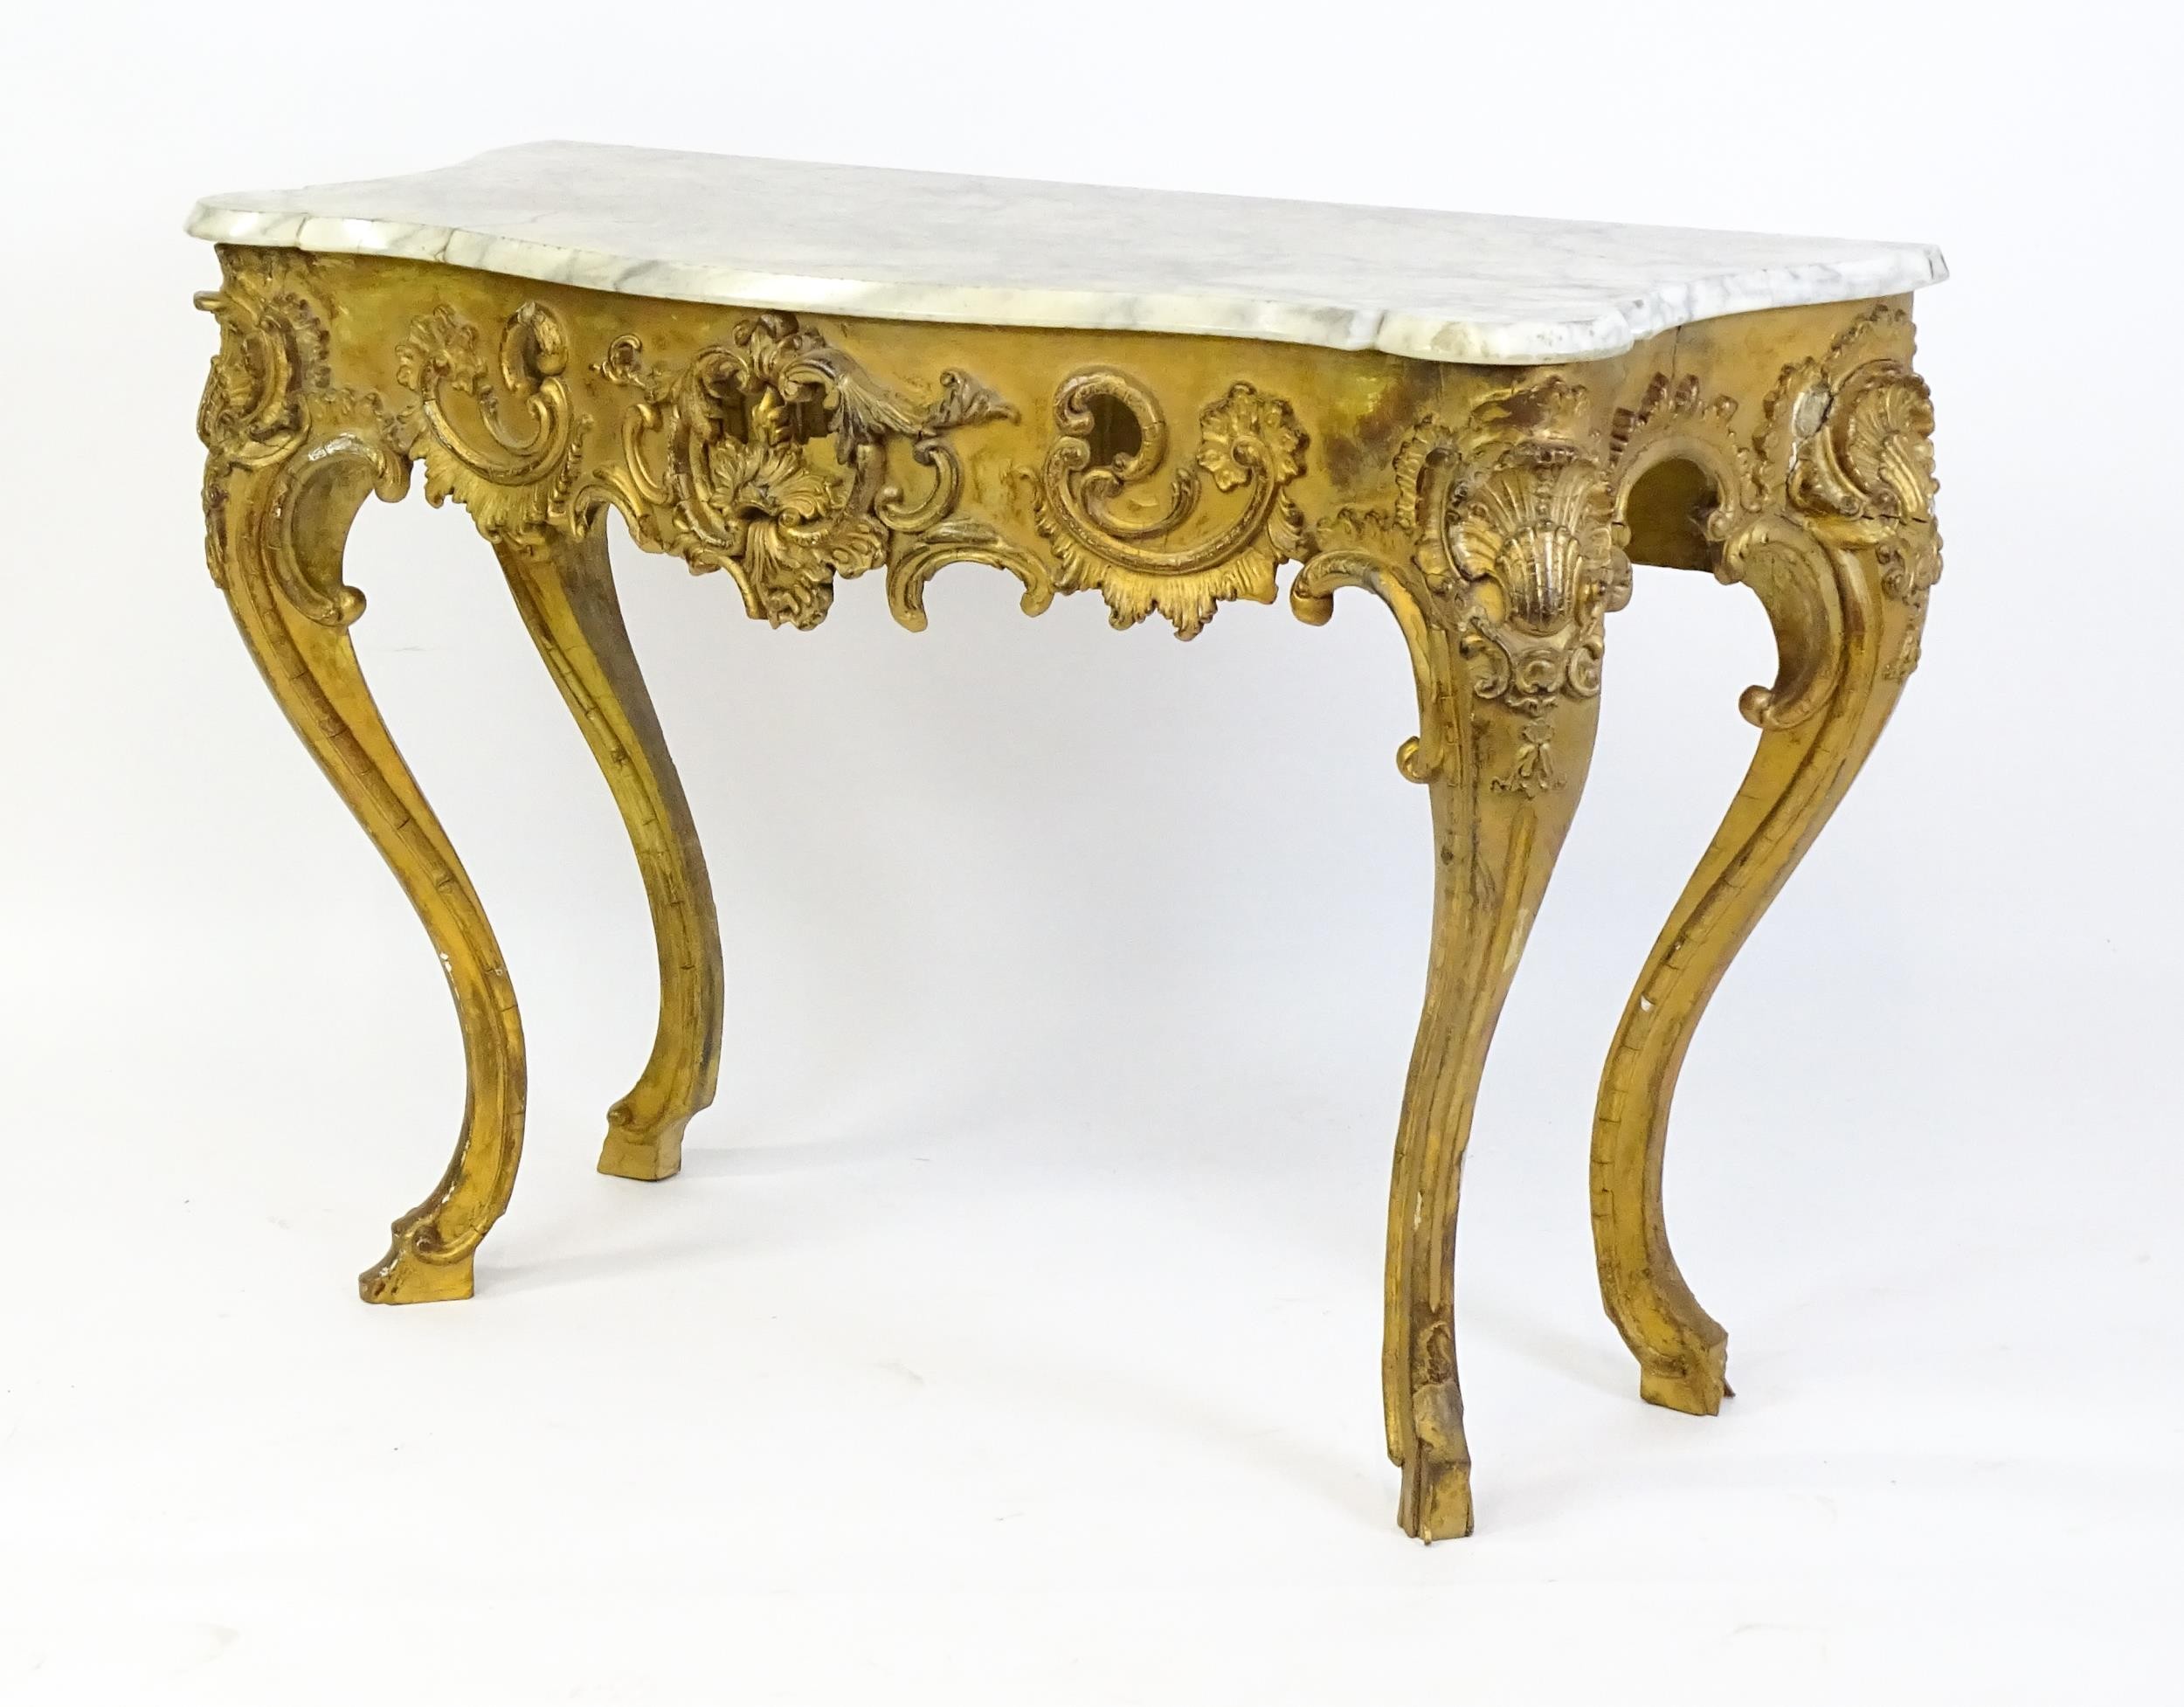 A 19thC marble topped table with a gesso and giltwood moulded base, decorated with shells, - Image 5 of 8